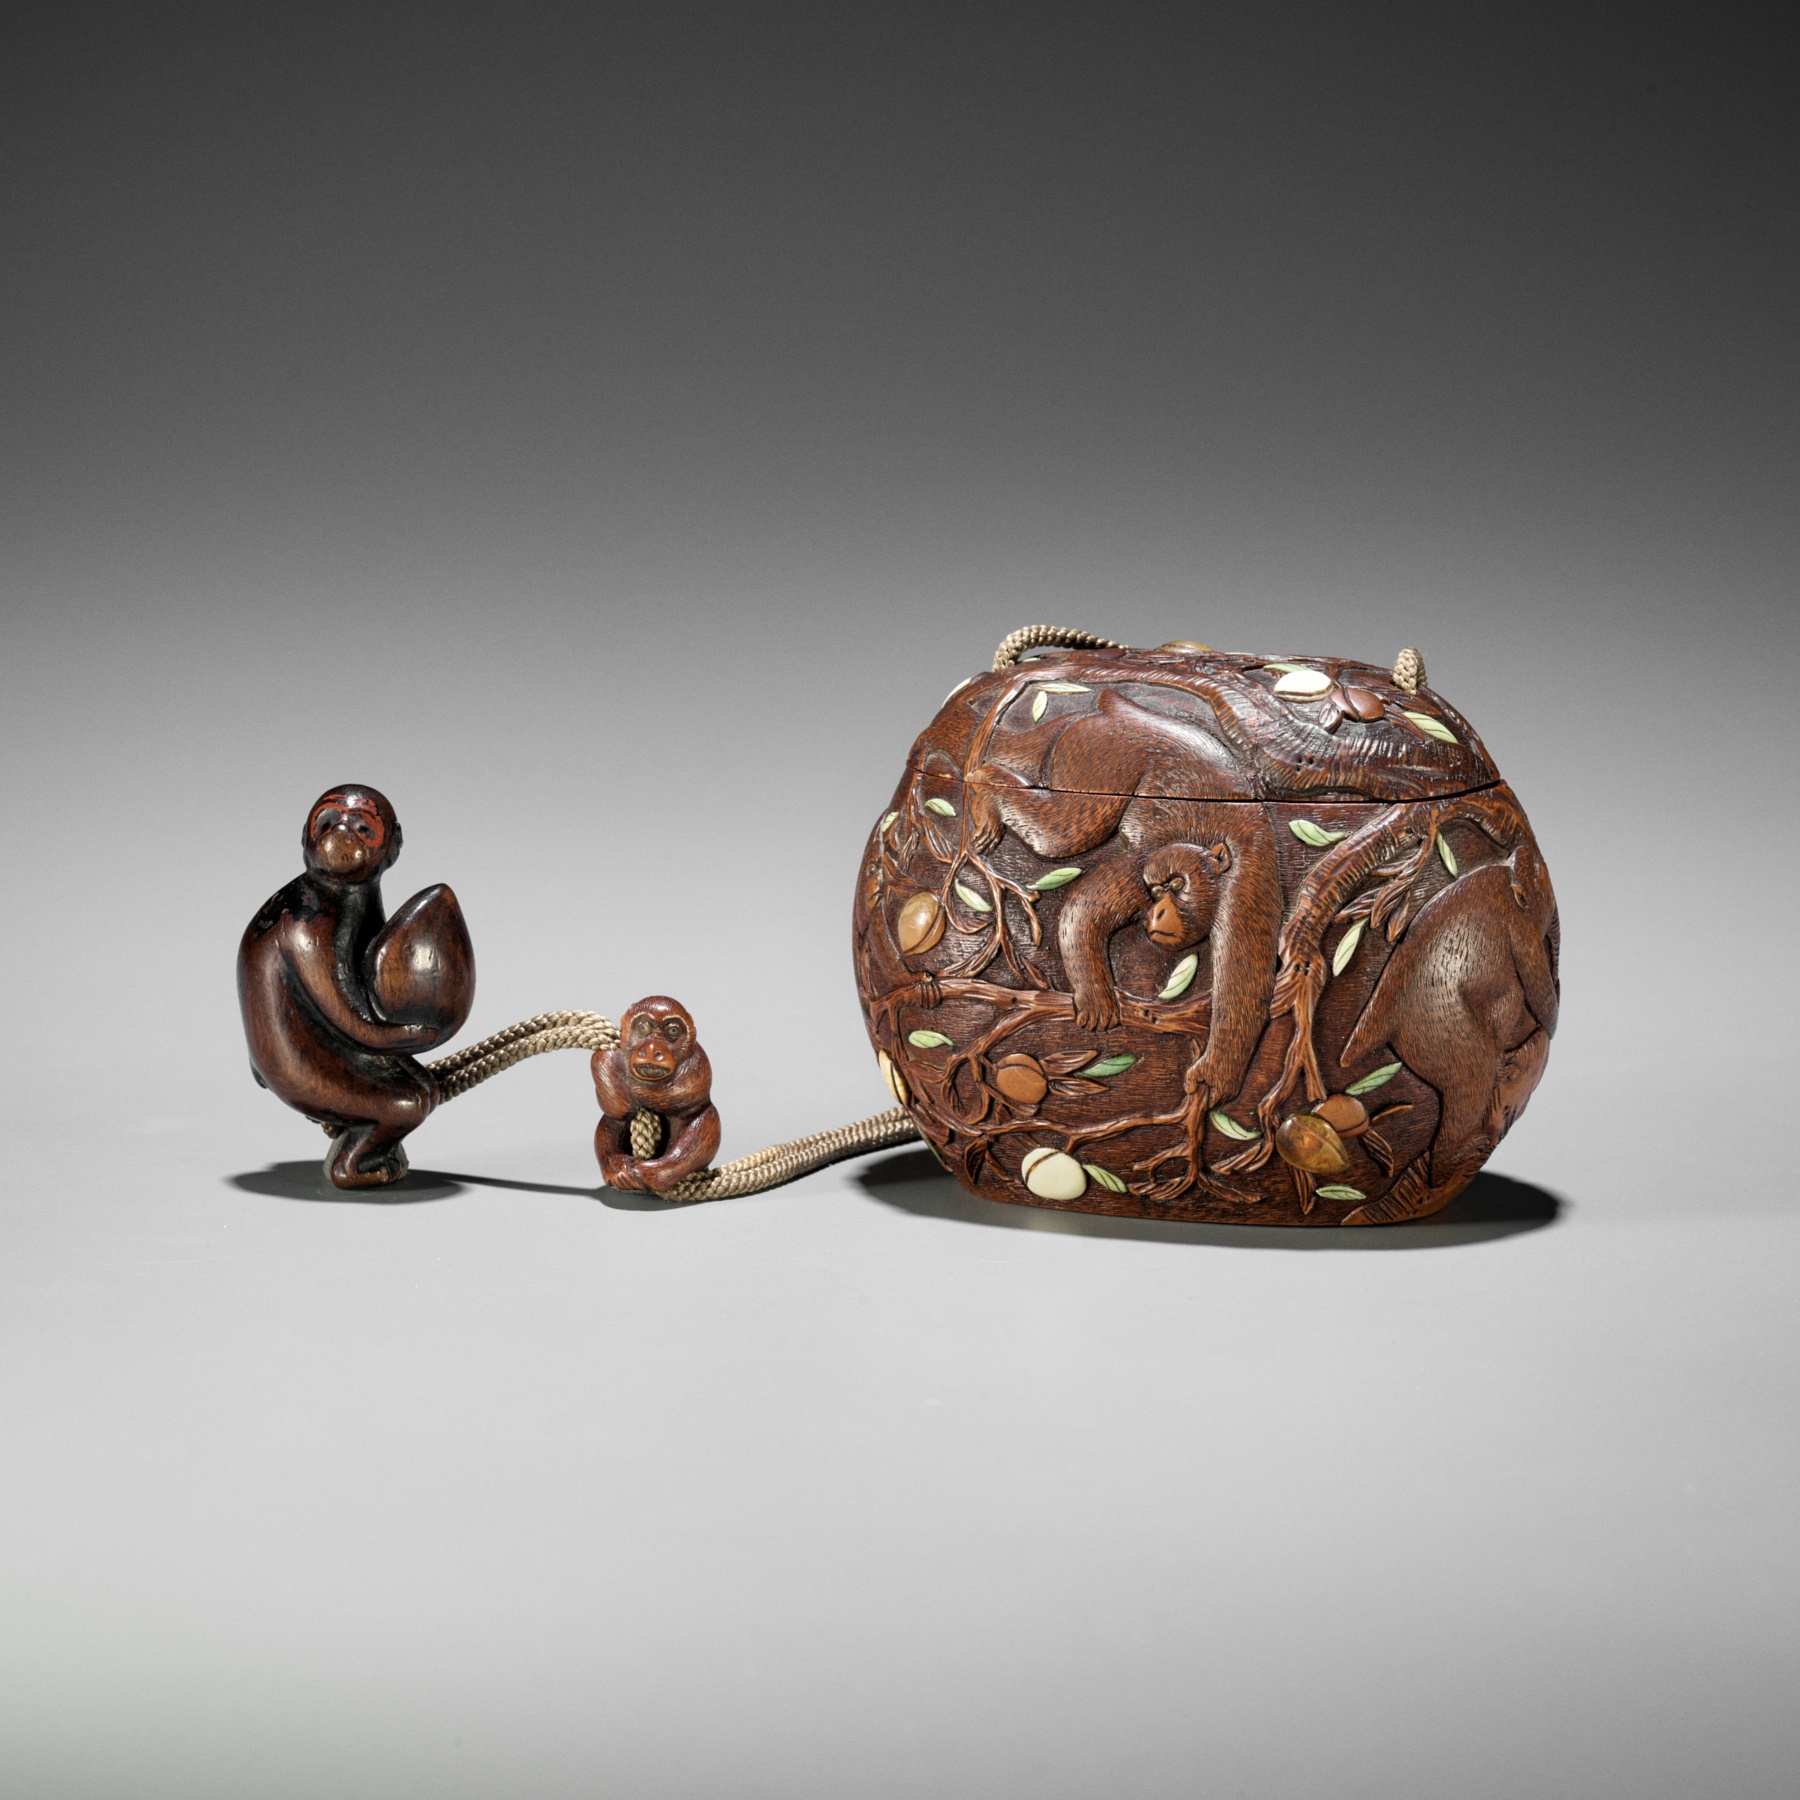 SHUOSAI: AN INLAID WOOD TONKOTSU DEPICTING MONKEYS AND PEACHES WITH EN-SUITE NETSUKE AND OJIME